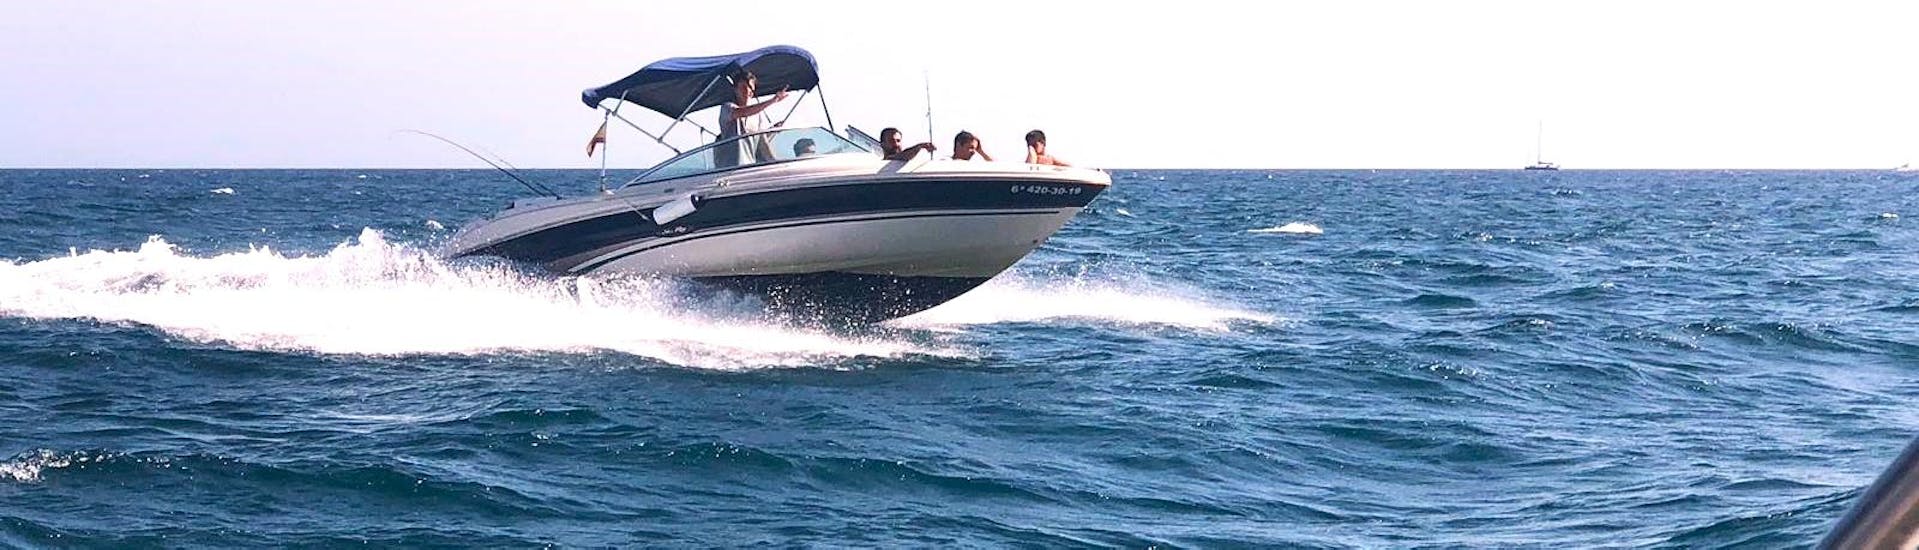 A participant cruising along the Alboran Sea, on a luxury yacht during a boat rental in Mallorca with Marbella Renting Boat.